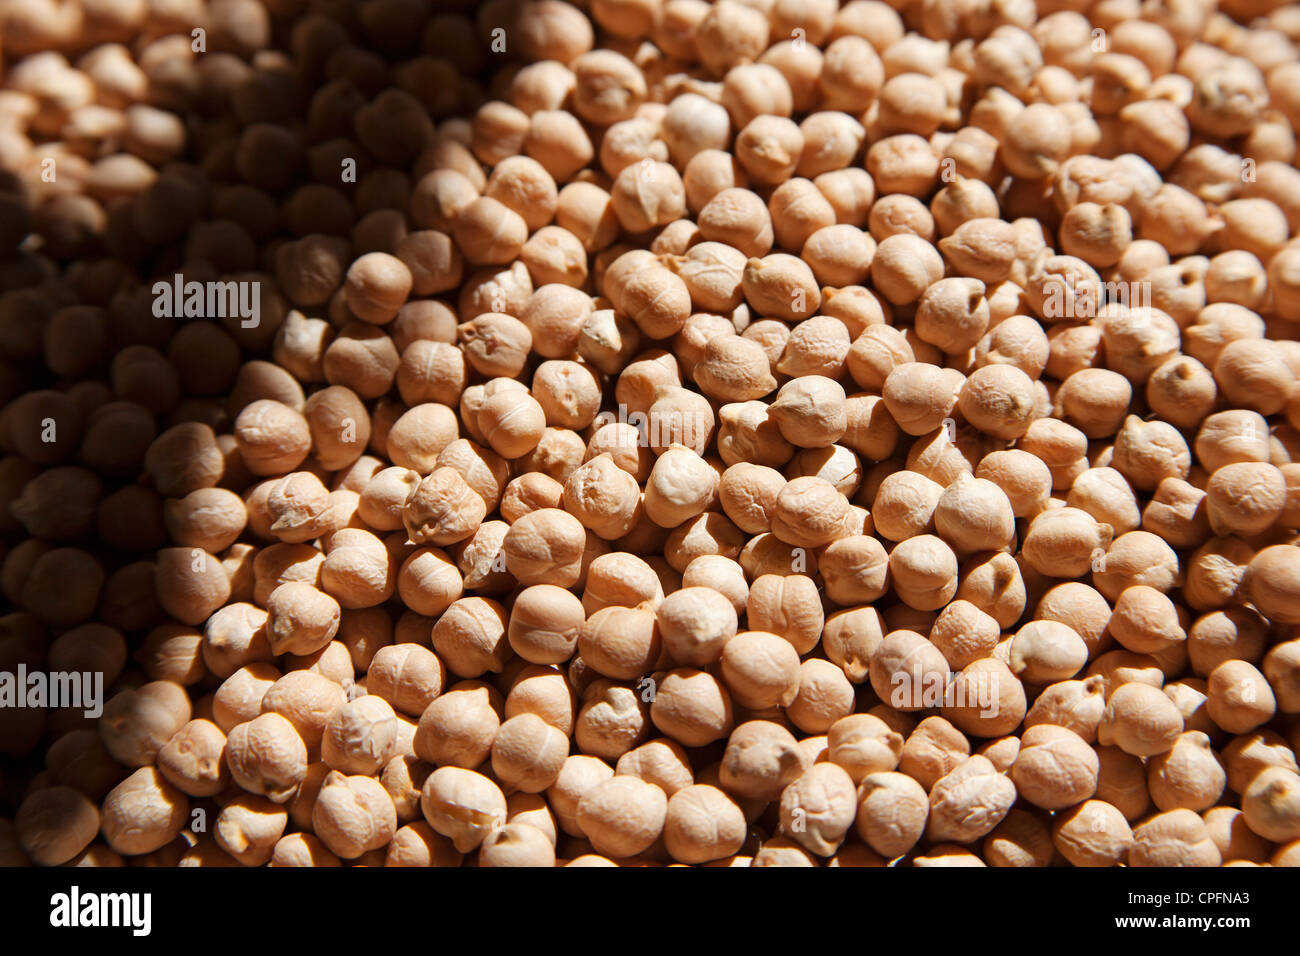 Chickpeas in a market Stock Photo